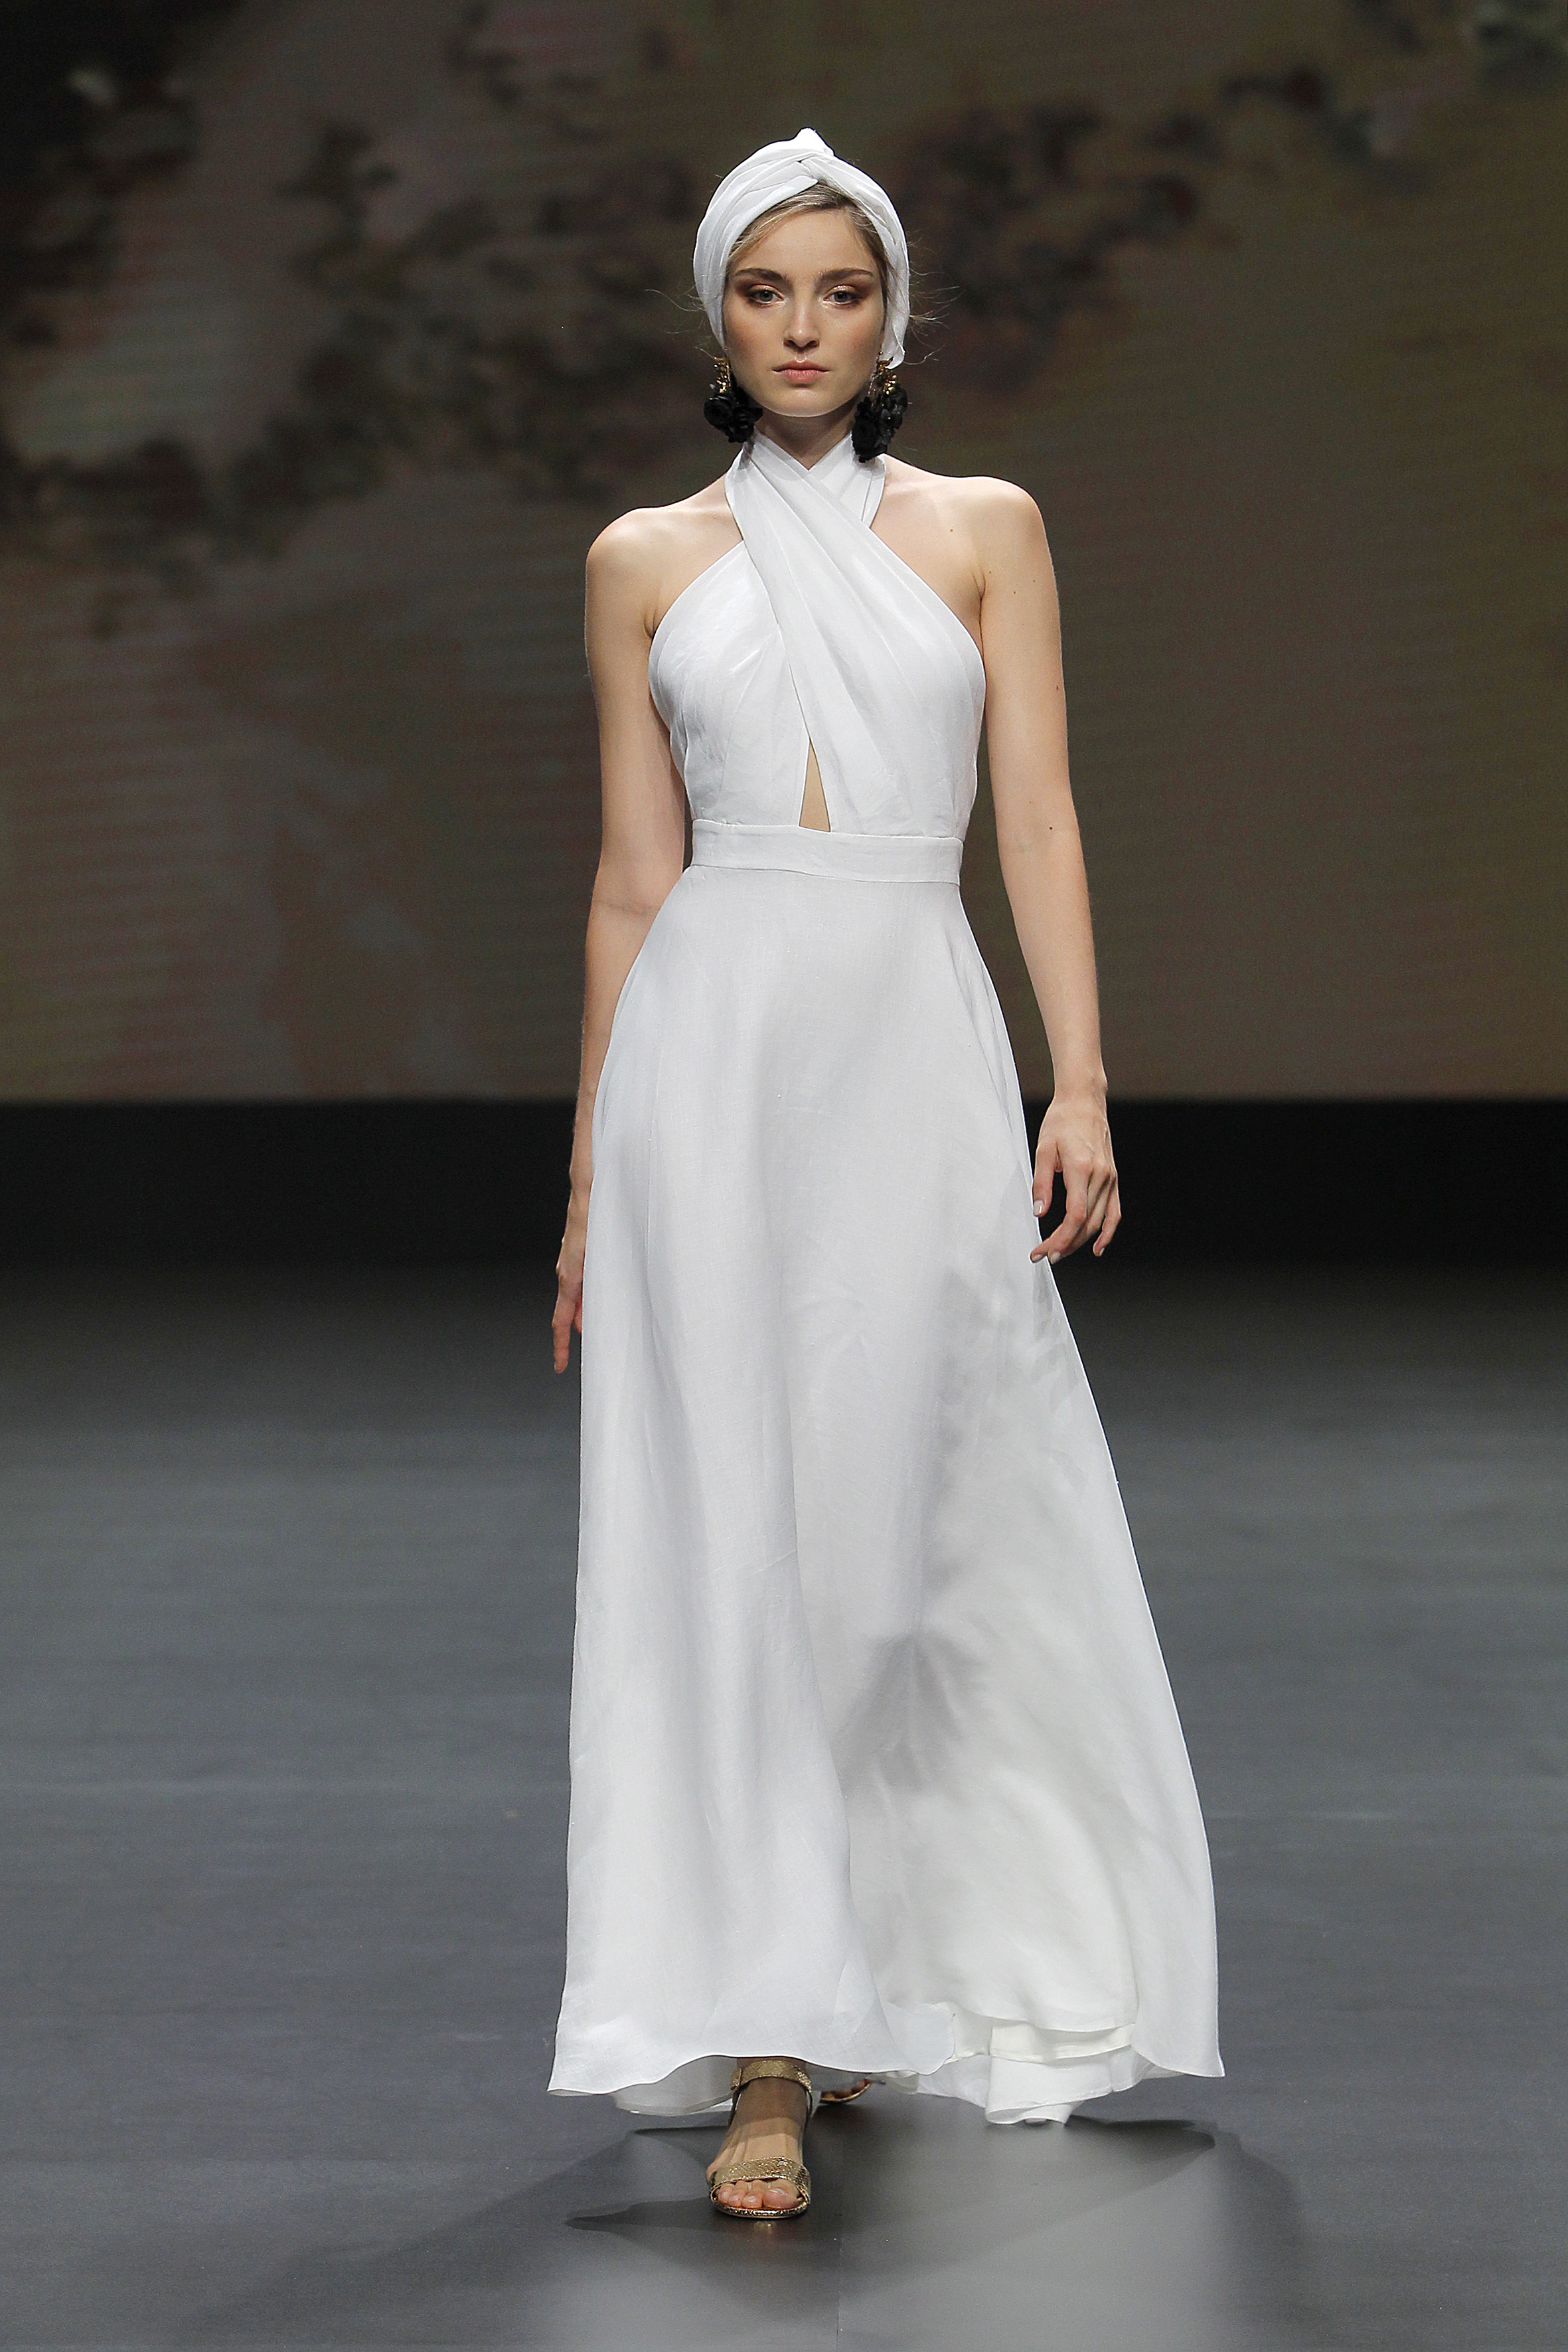 Rembo Styling 2021 | Créditos: Valmont Barcelona Bridal Fashion Week 2020